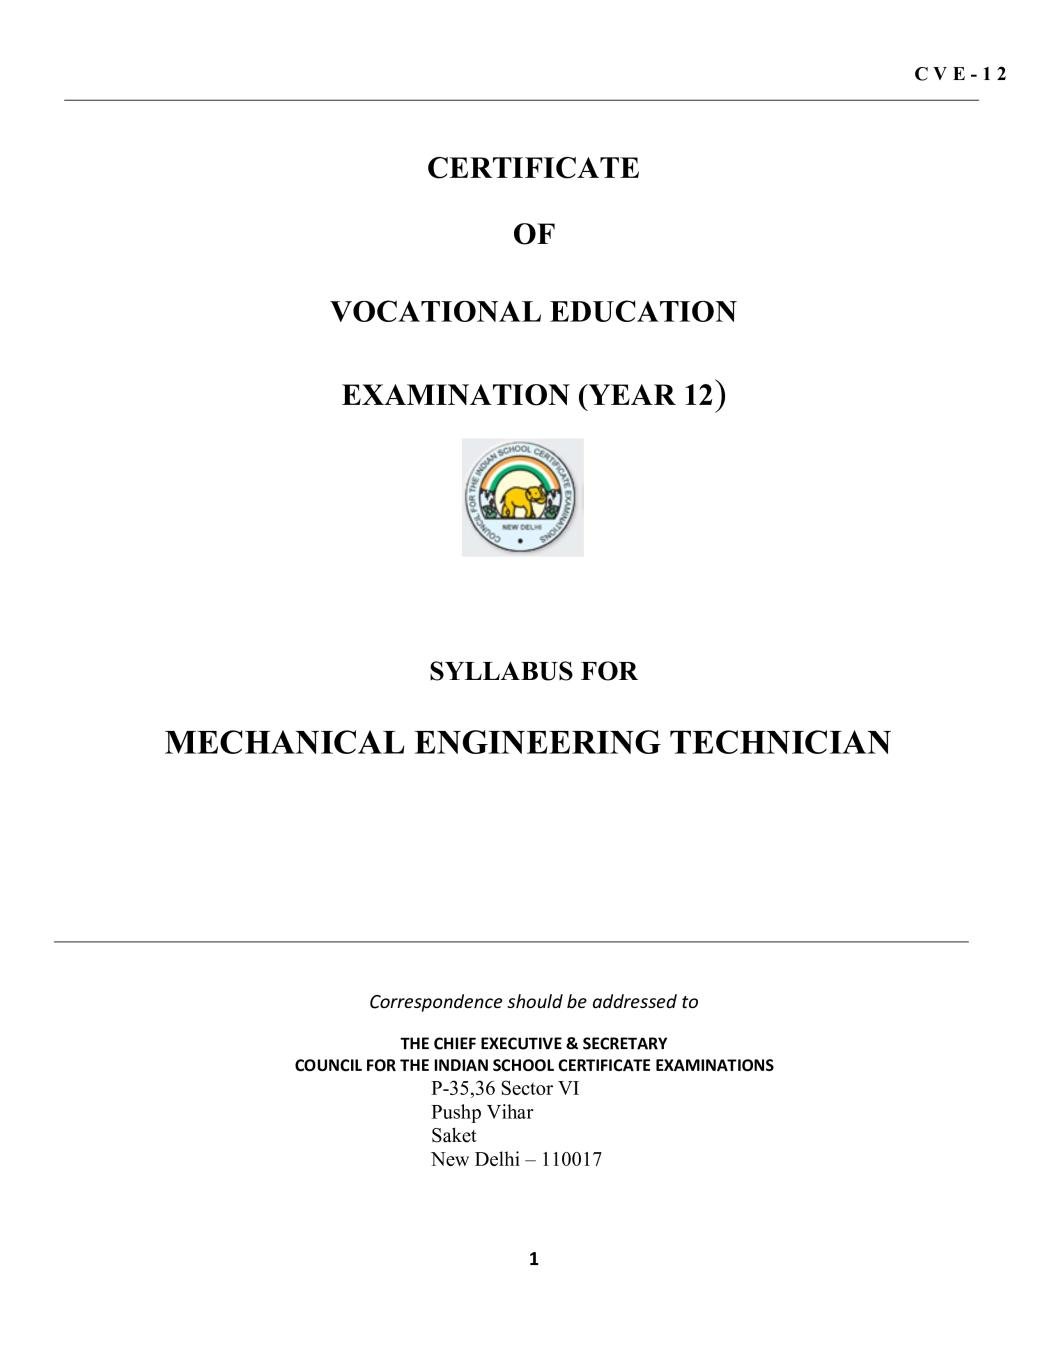 ISC Class 12 Mechanical Engineering Technician Syllabus (Vocational Course) - Page 1